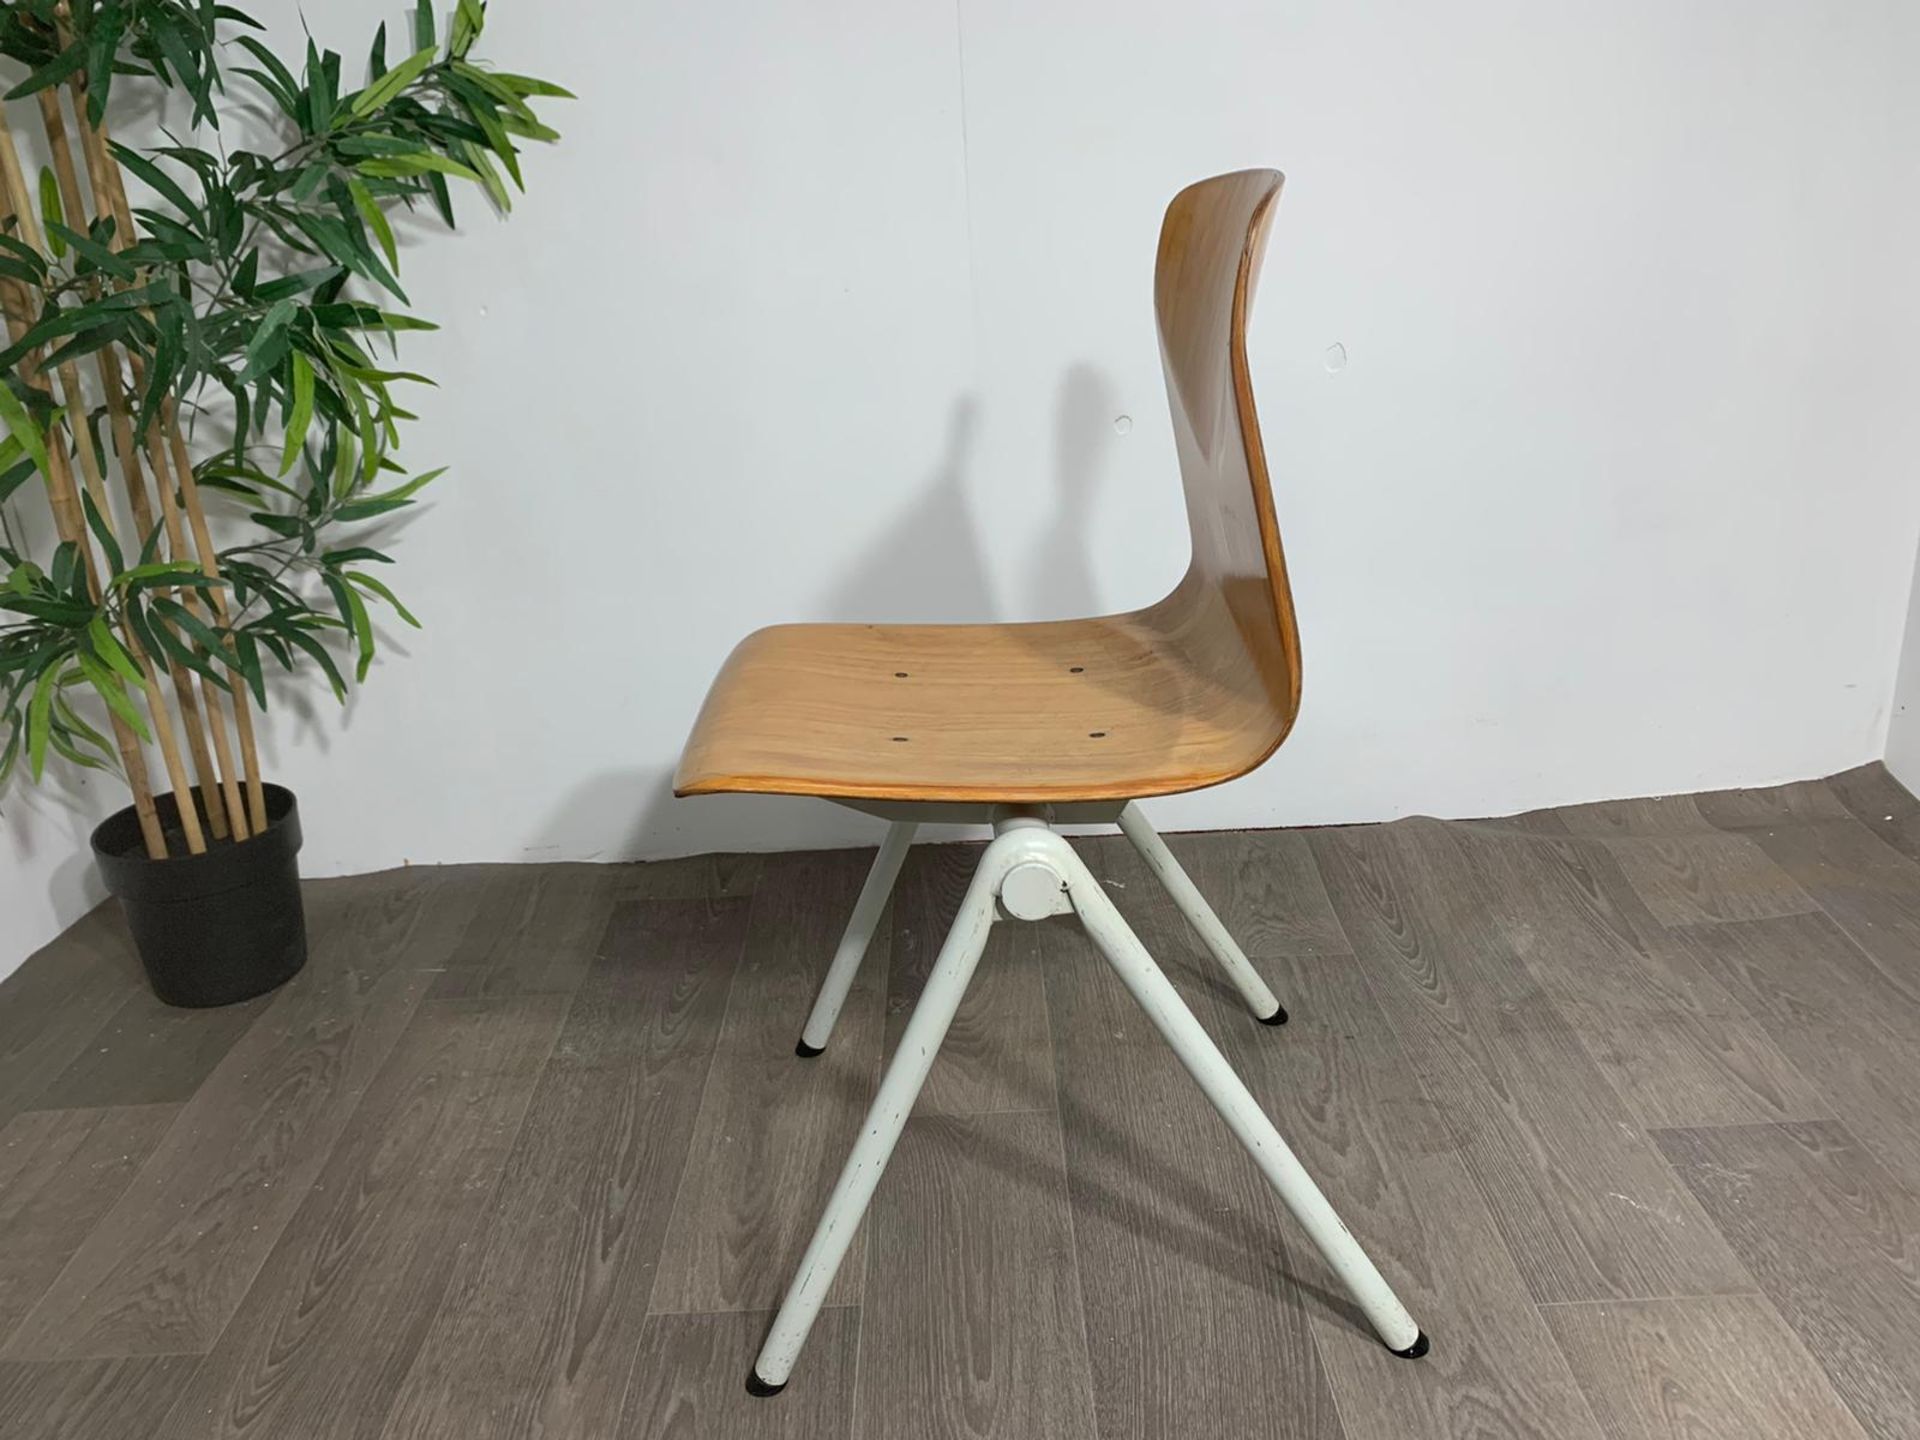 Mid Century Wooden Chair with Steel Legs - Image 5 of 10